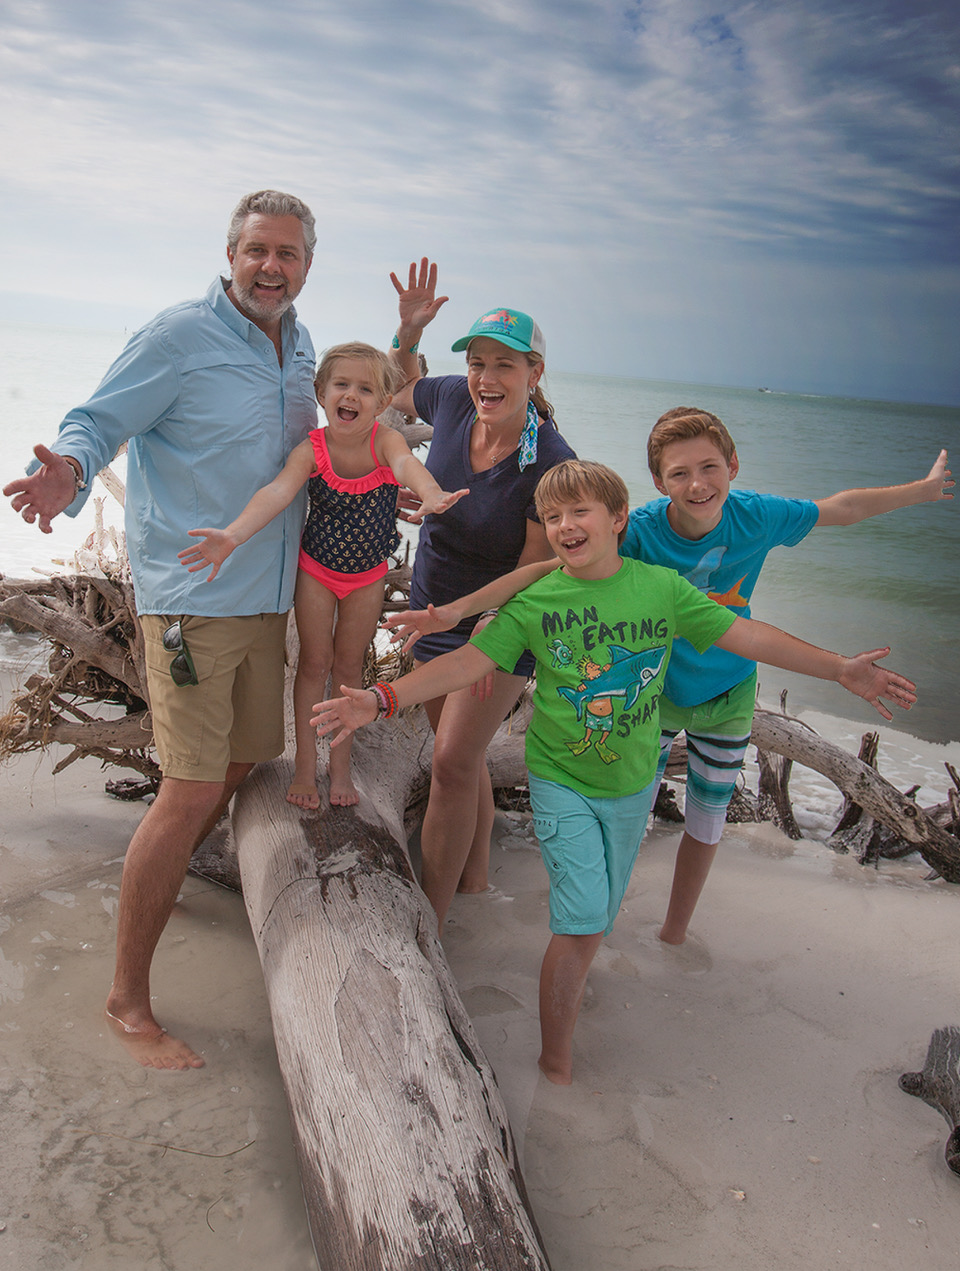 The Crawford family on-location for a special episode of "how to Do florida"